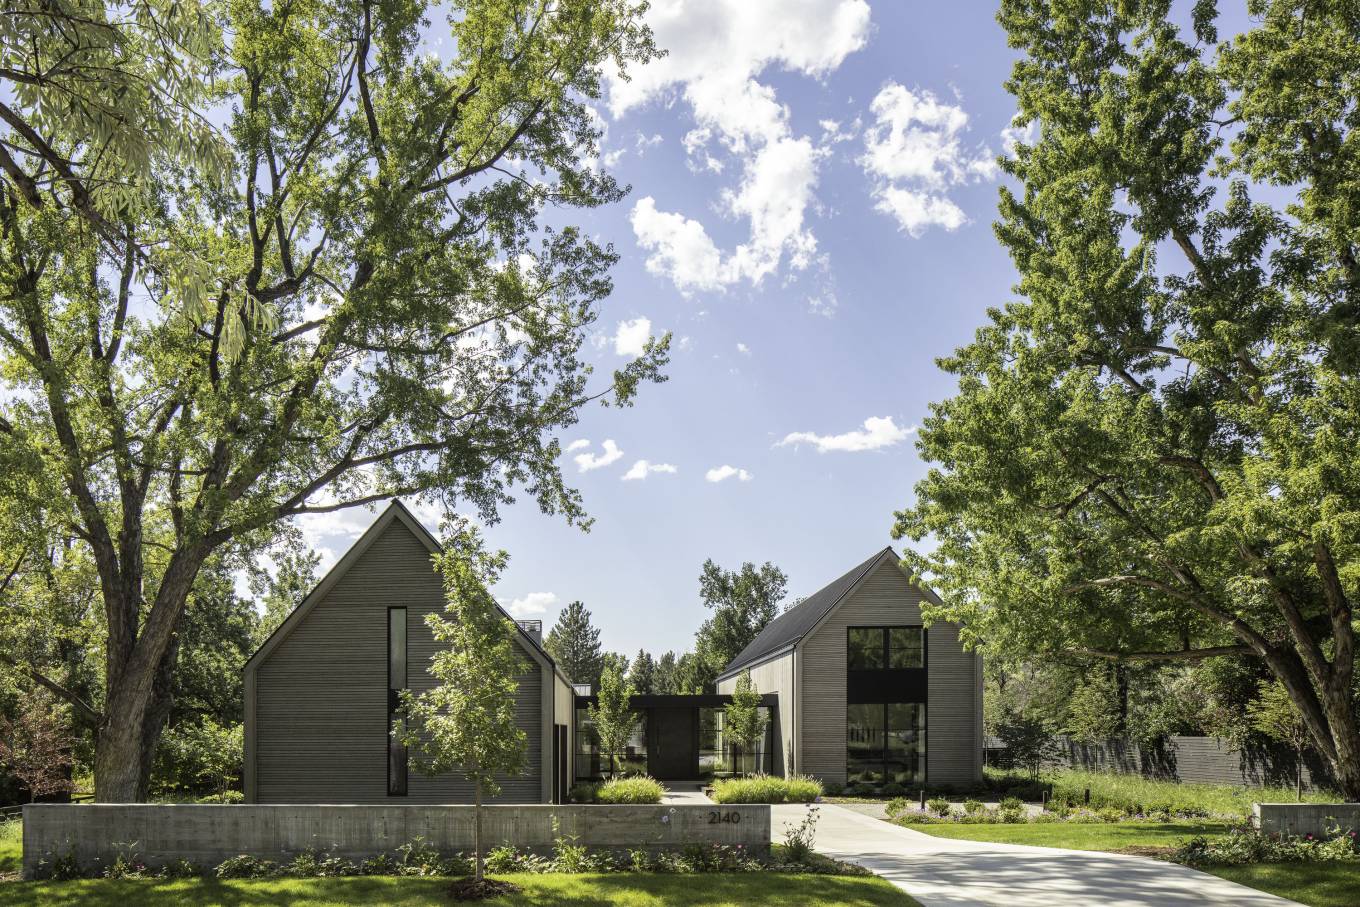 The Linden Grove residence is a modern interpretation of local agricultural and rural architecture, located on a large lot in a treelined neighborhood in Boulder.